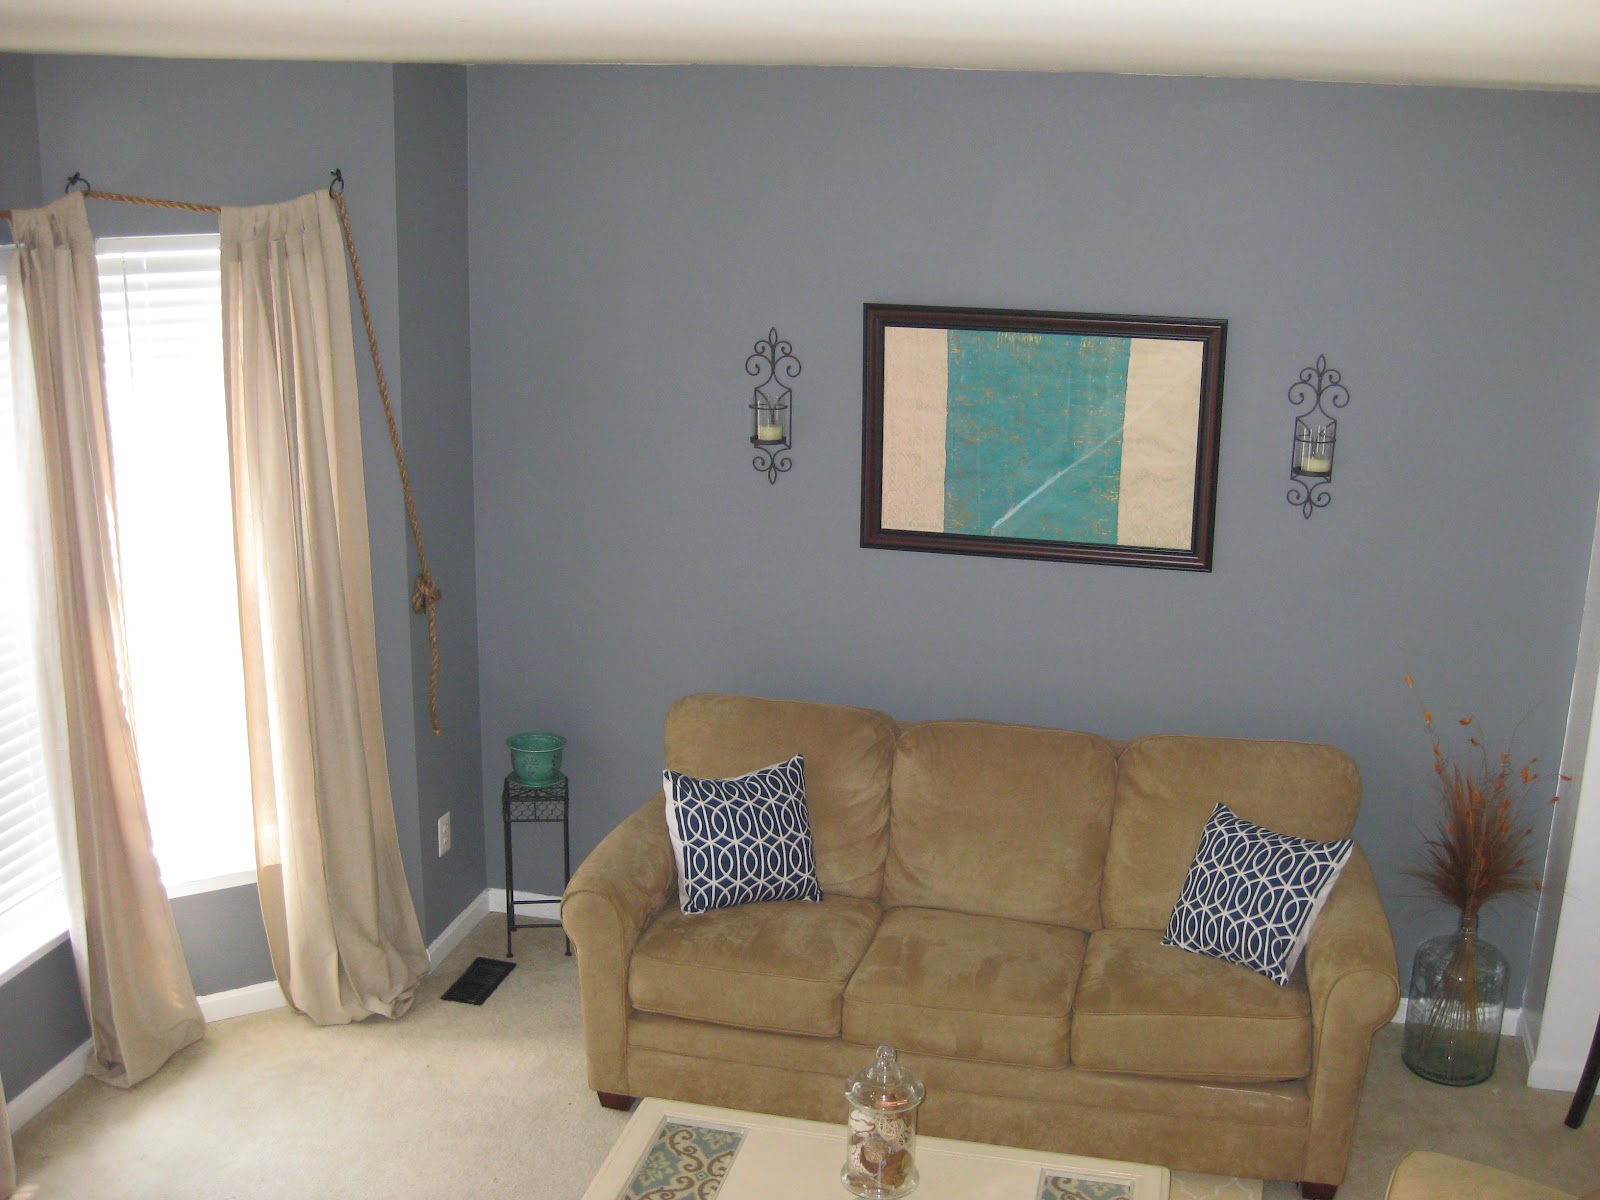  blogspotcom201204framed out living room wall by amyhtml 1600x1200